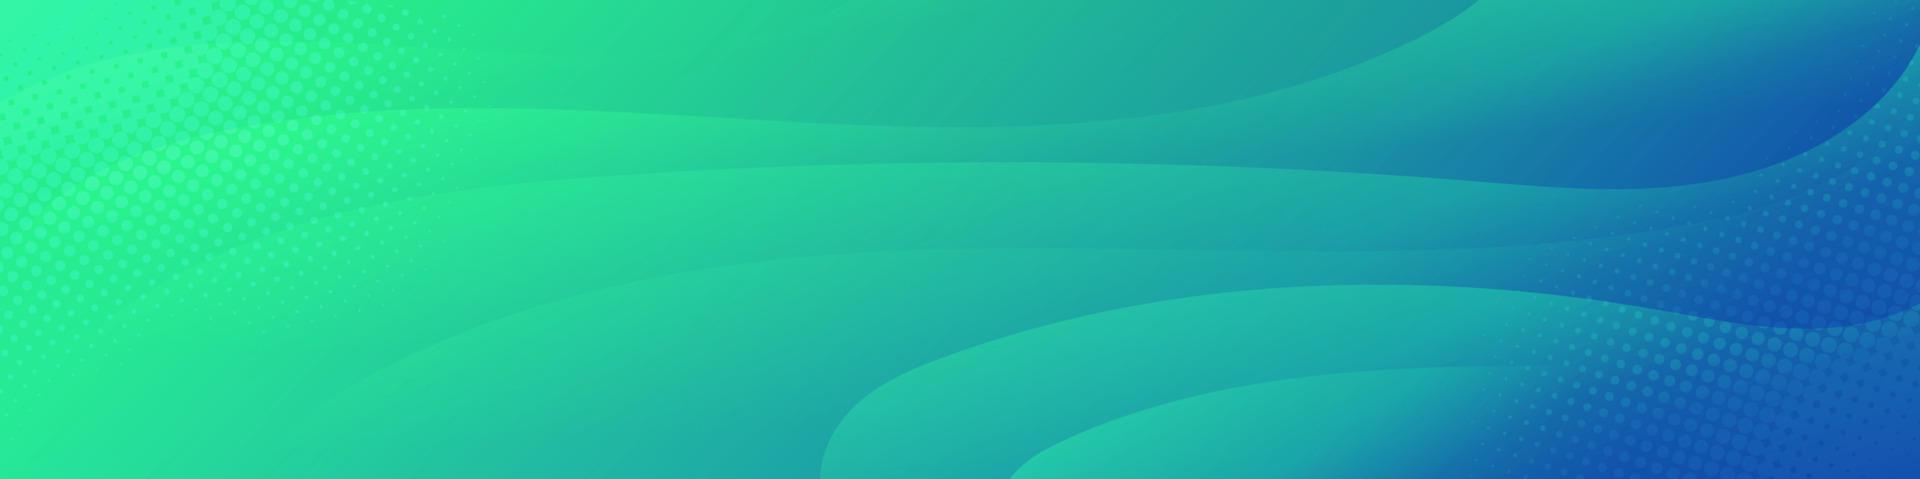 Abstract Gradient green and blue  Fluid Wave Banner Template vector